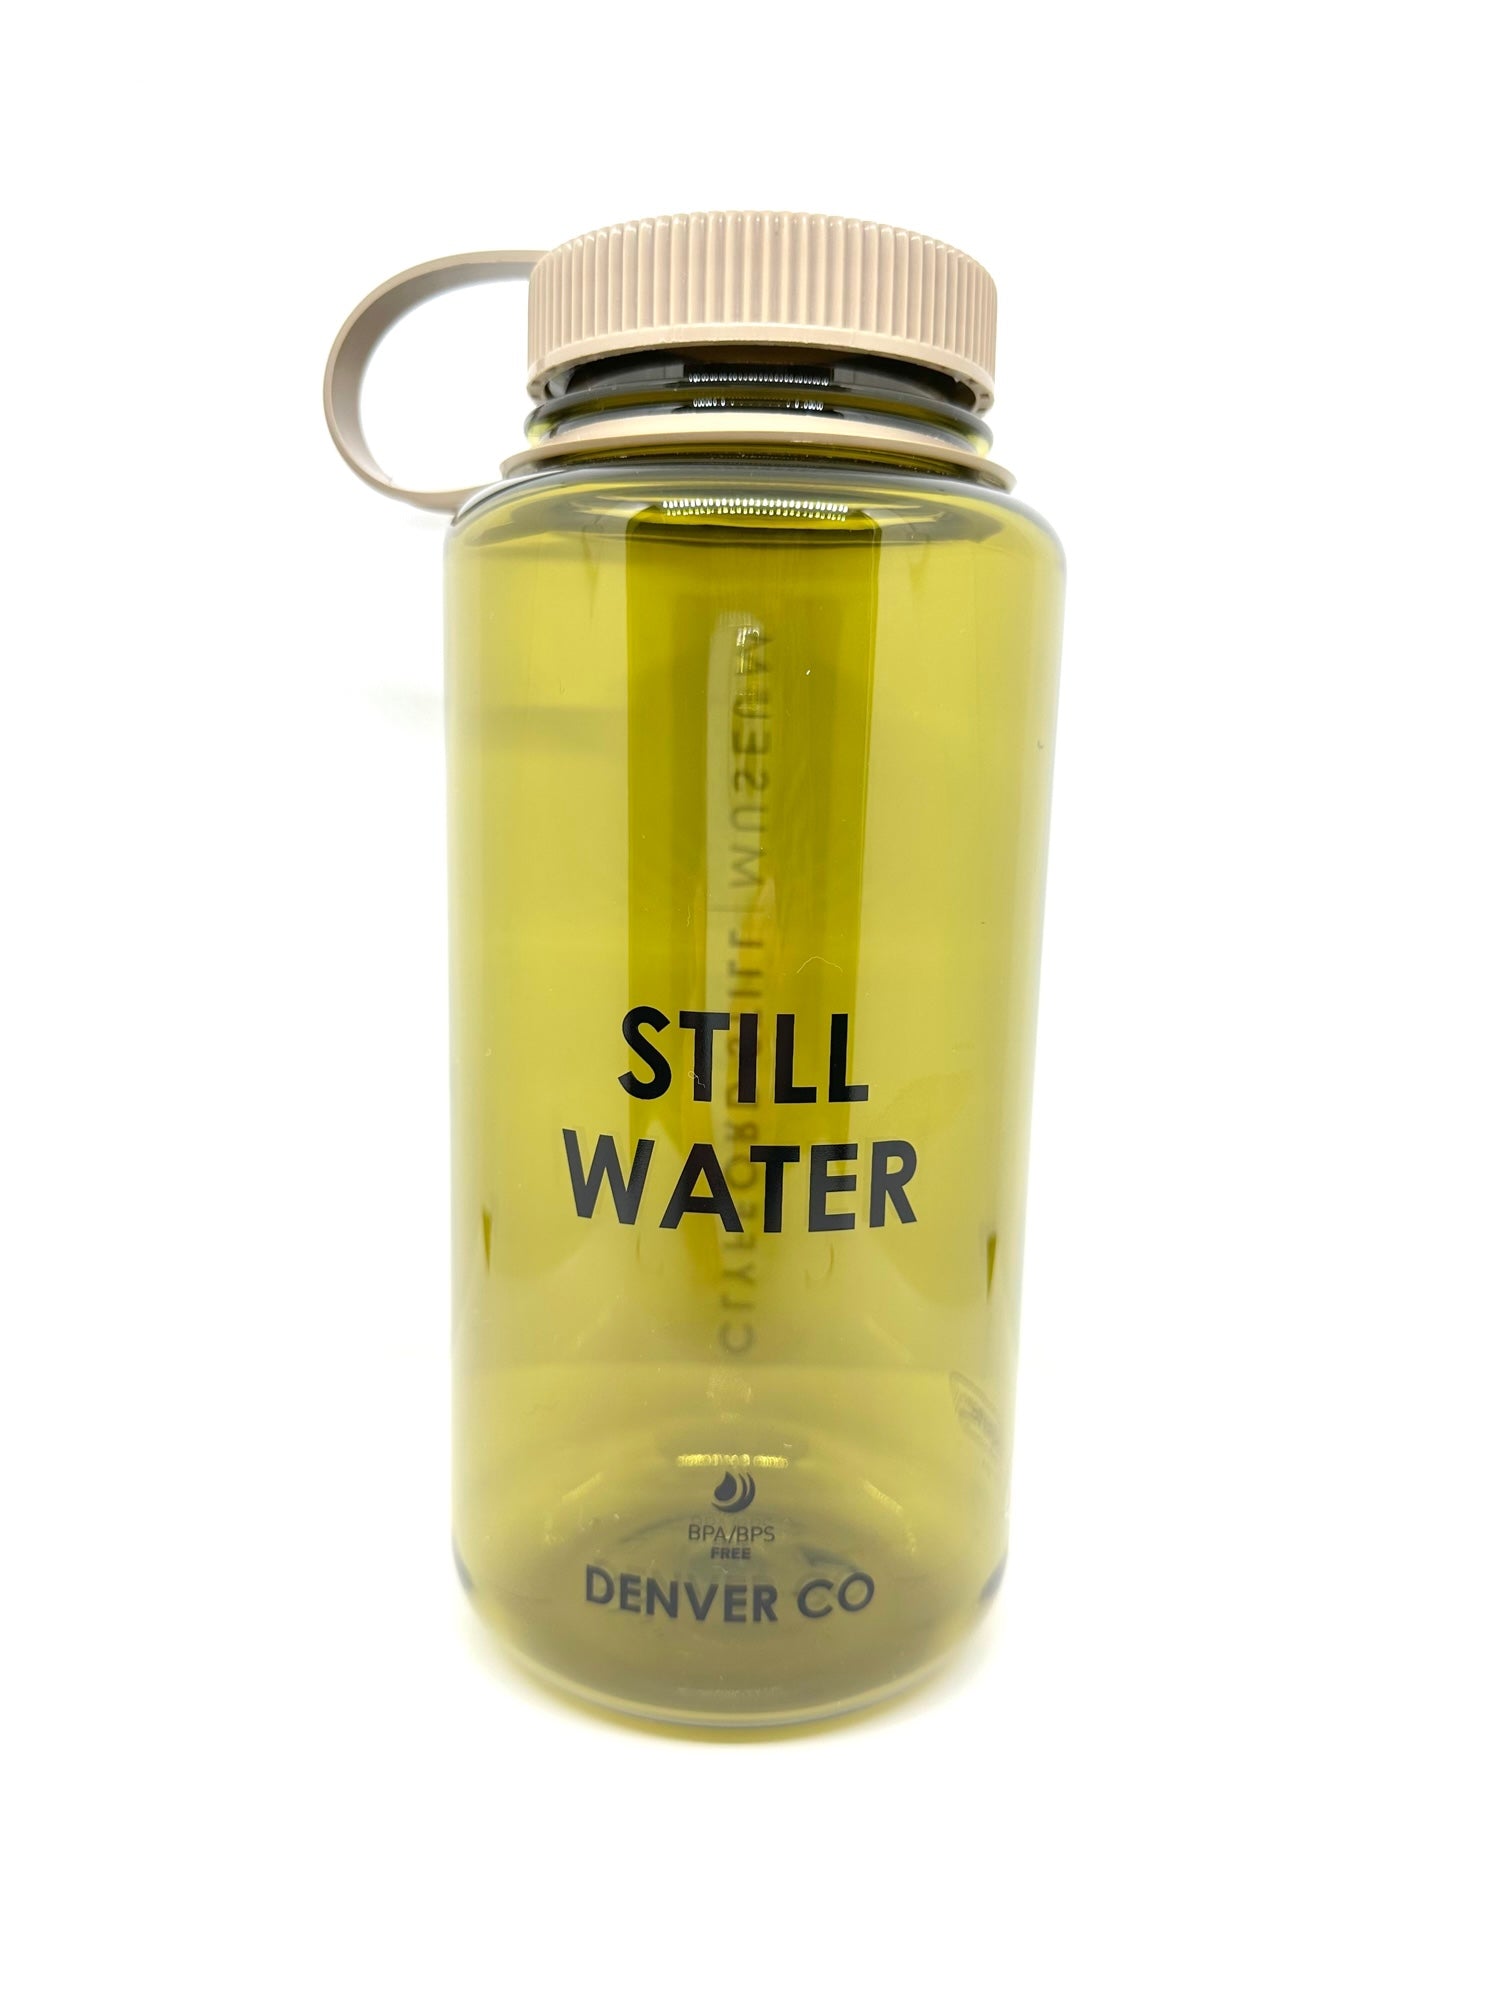 Olive Nalgene's classic 32oz wide-mouth water bottle with mocha cap and slogan “STILL WATER”. 